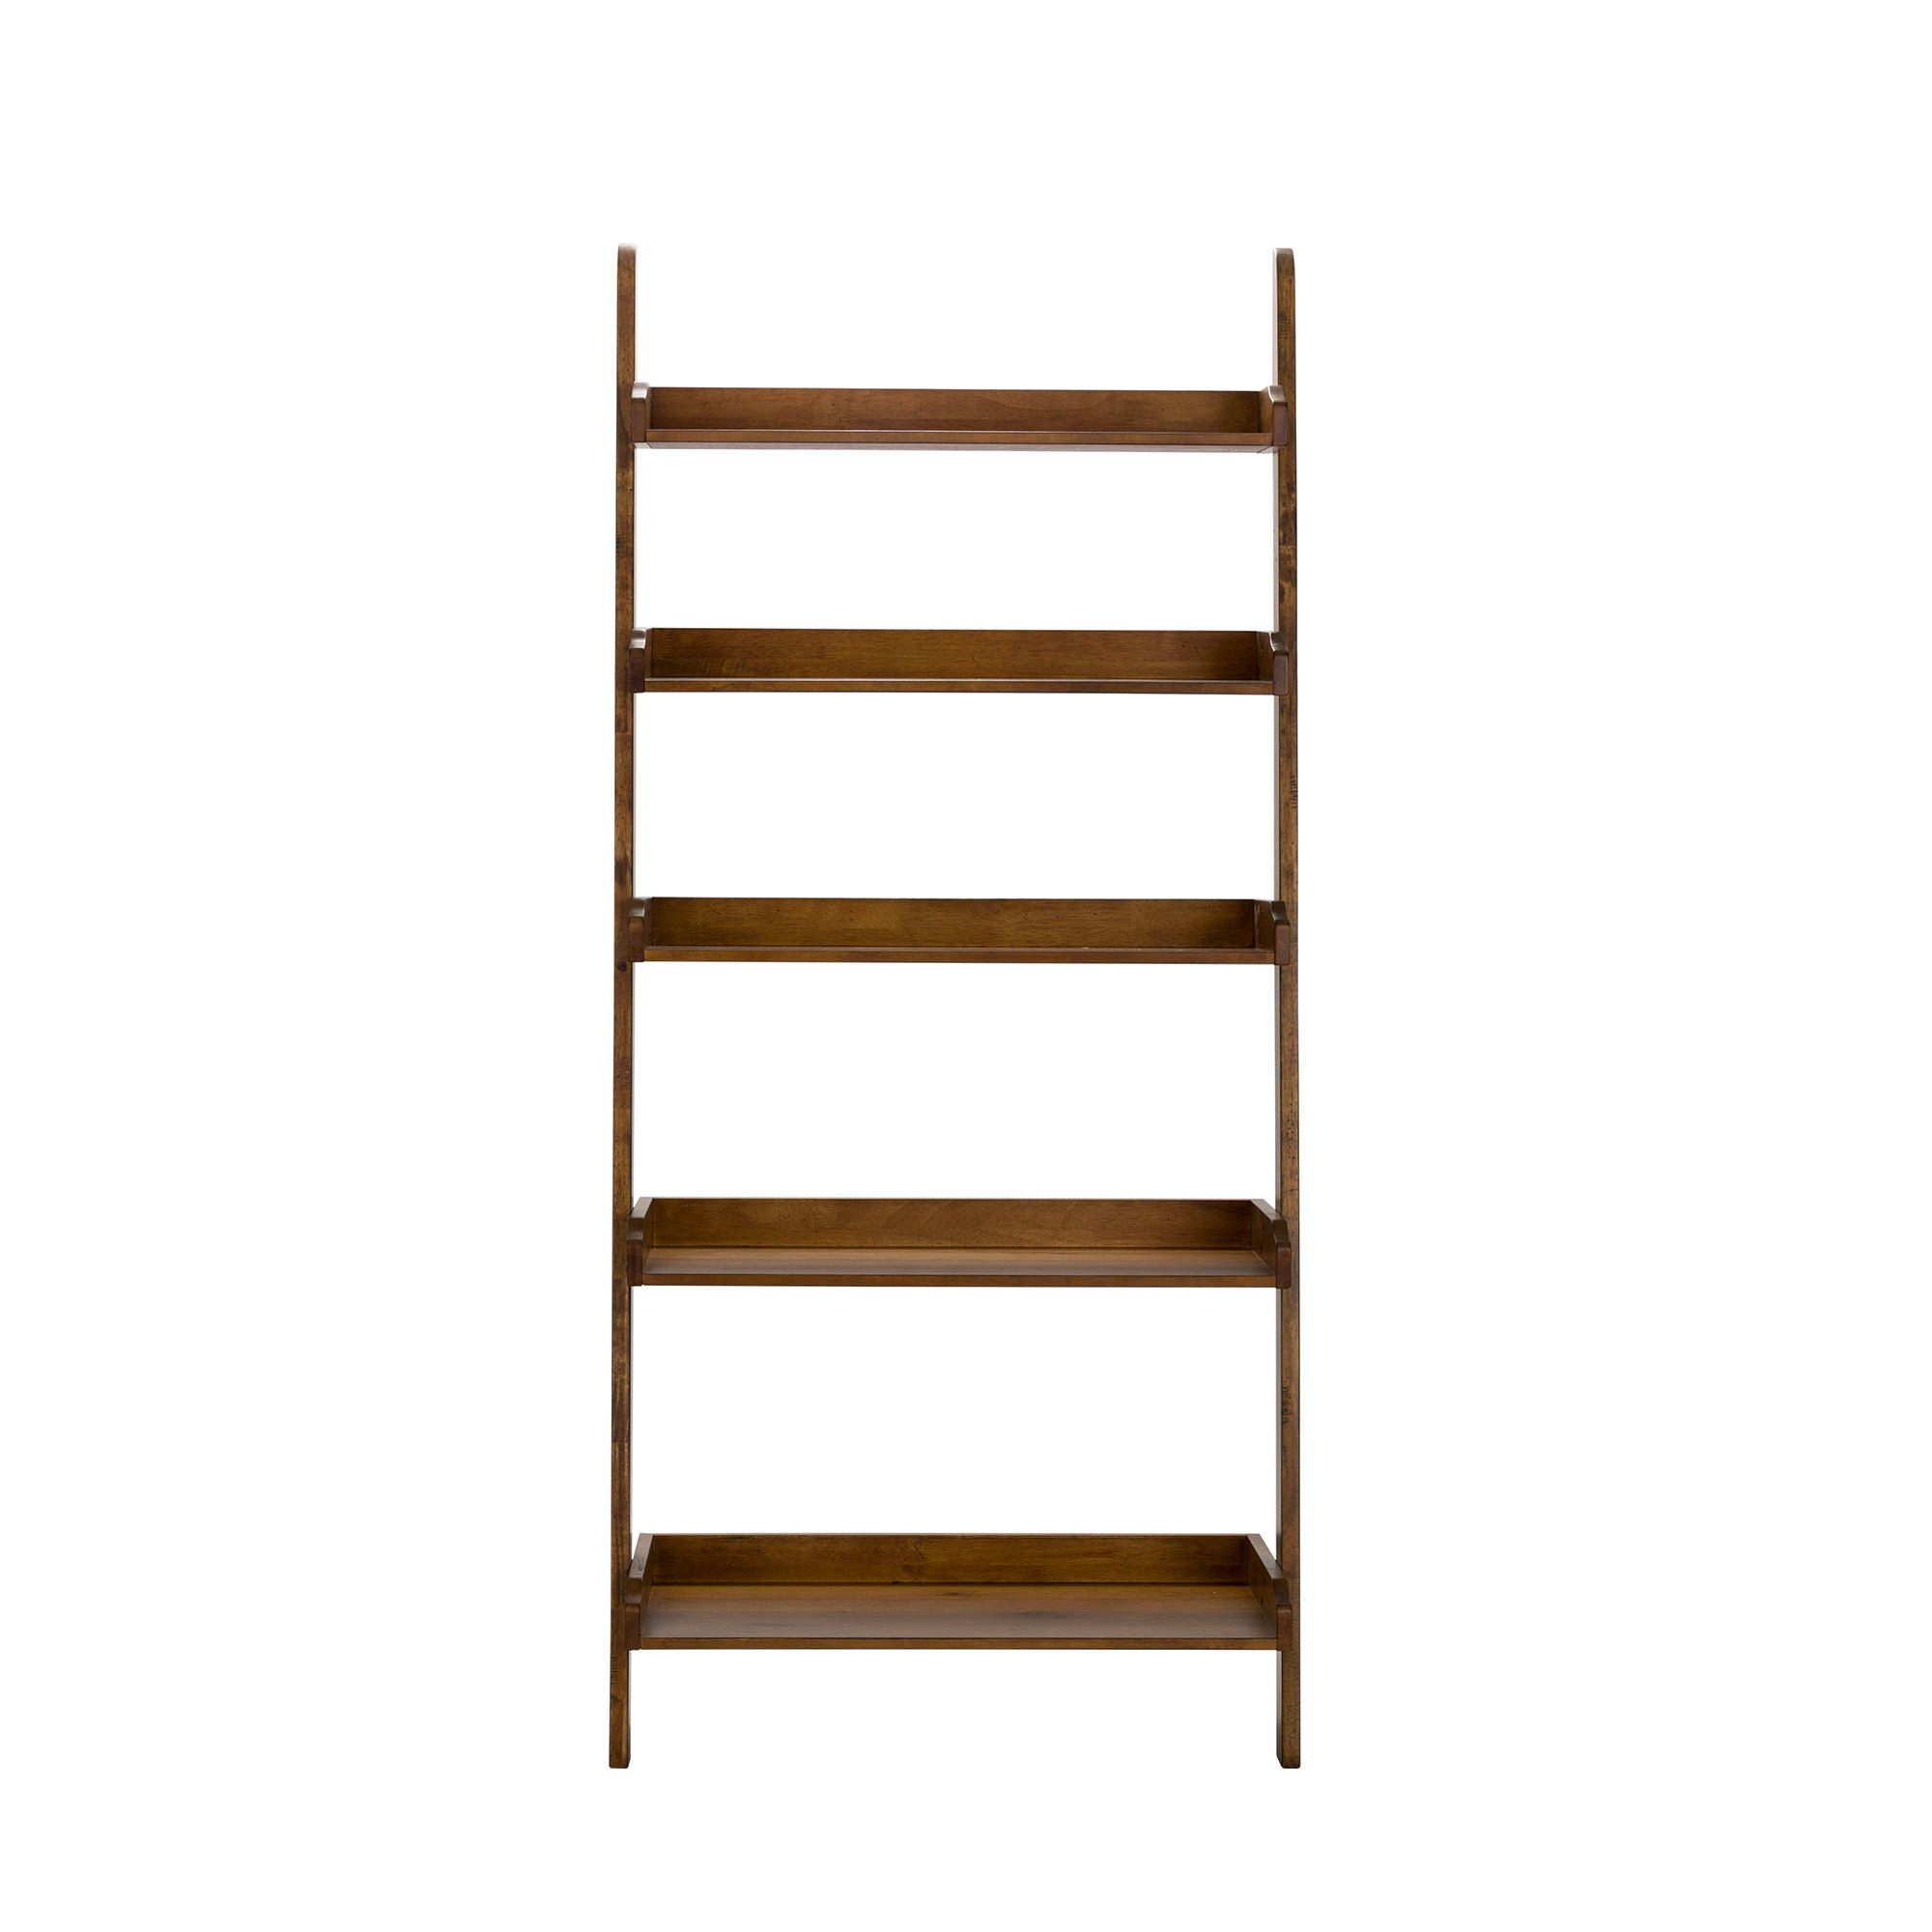 Claybrooks Ladder Bookcase Intended For Most Up To Date Silvestri Ladder Bookcases (View 14 of 20)